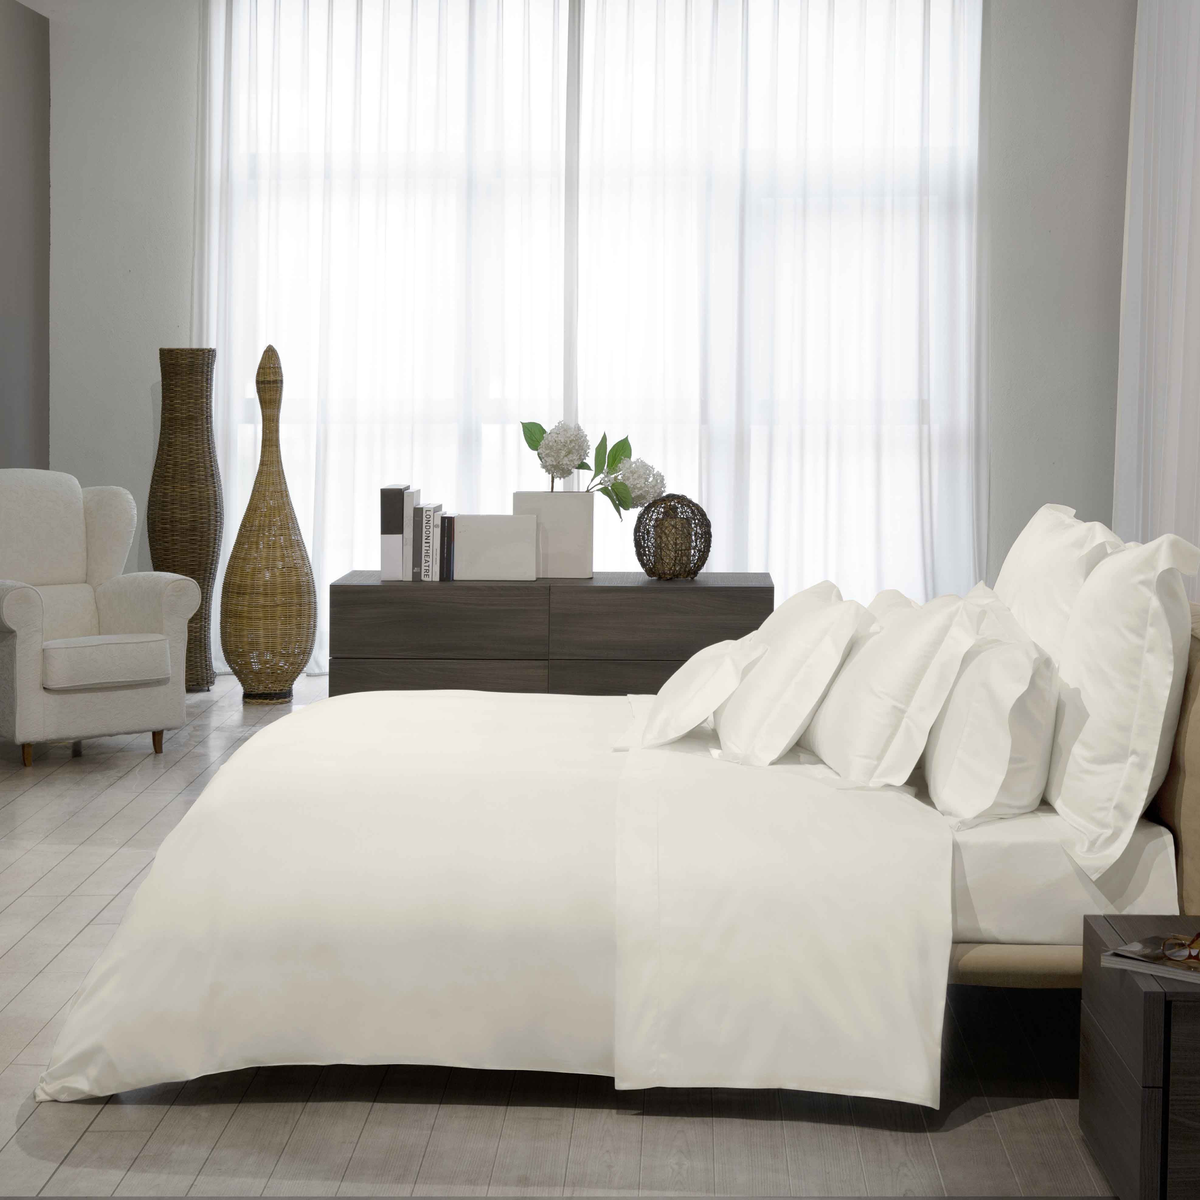 Full Bed Dressed in Ivory Signoria Nuvola Percale Bedding